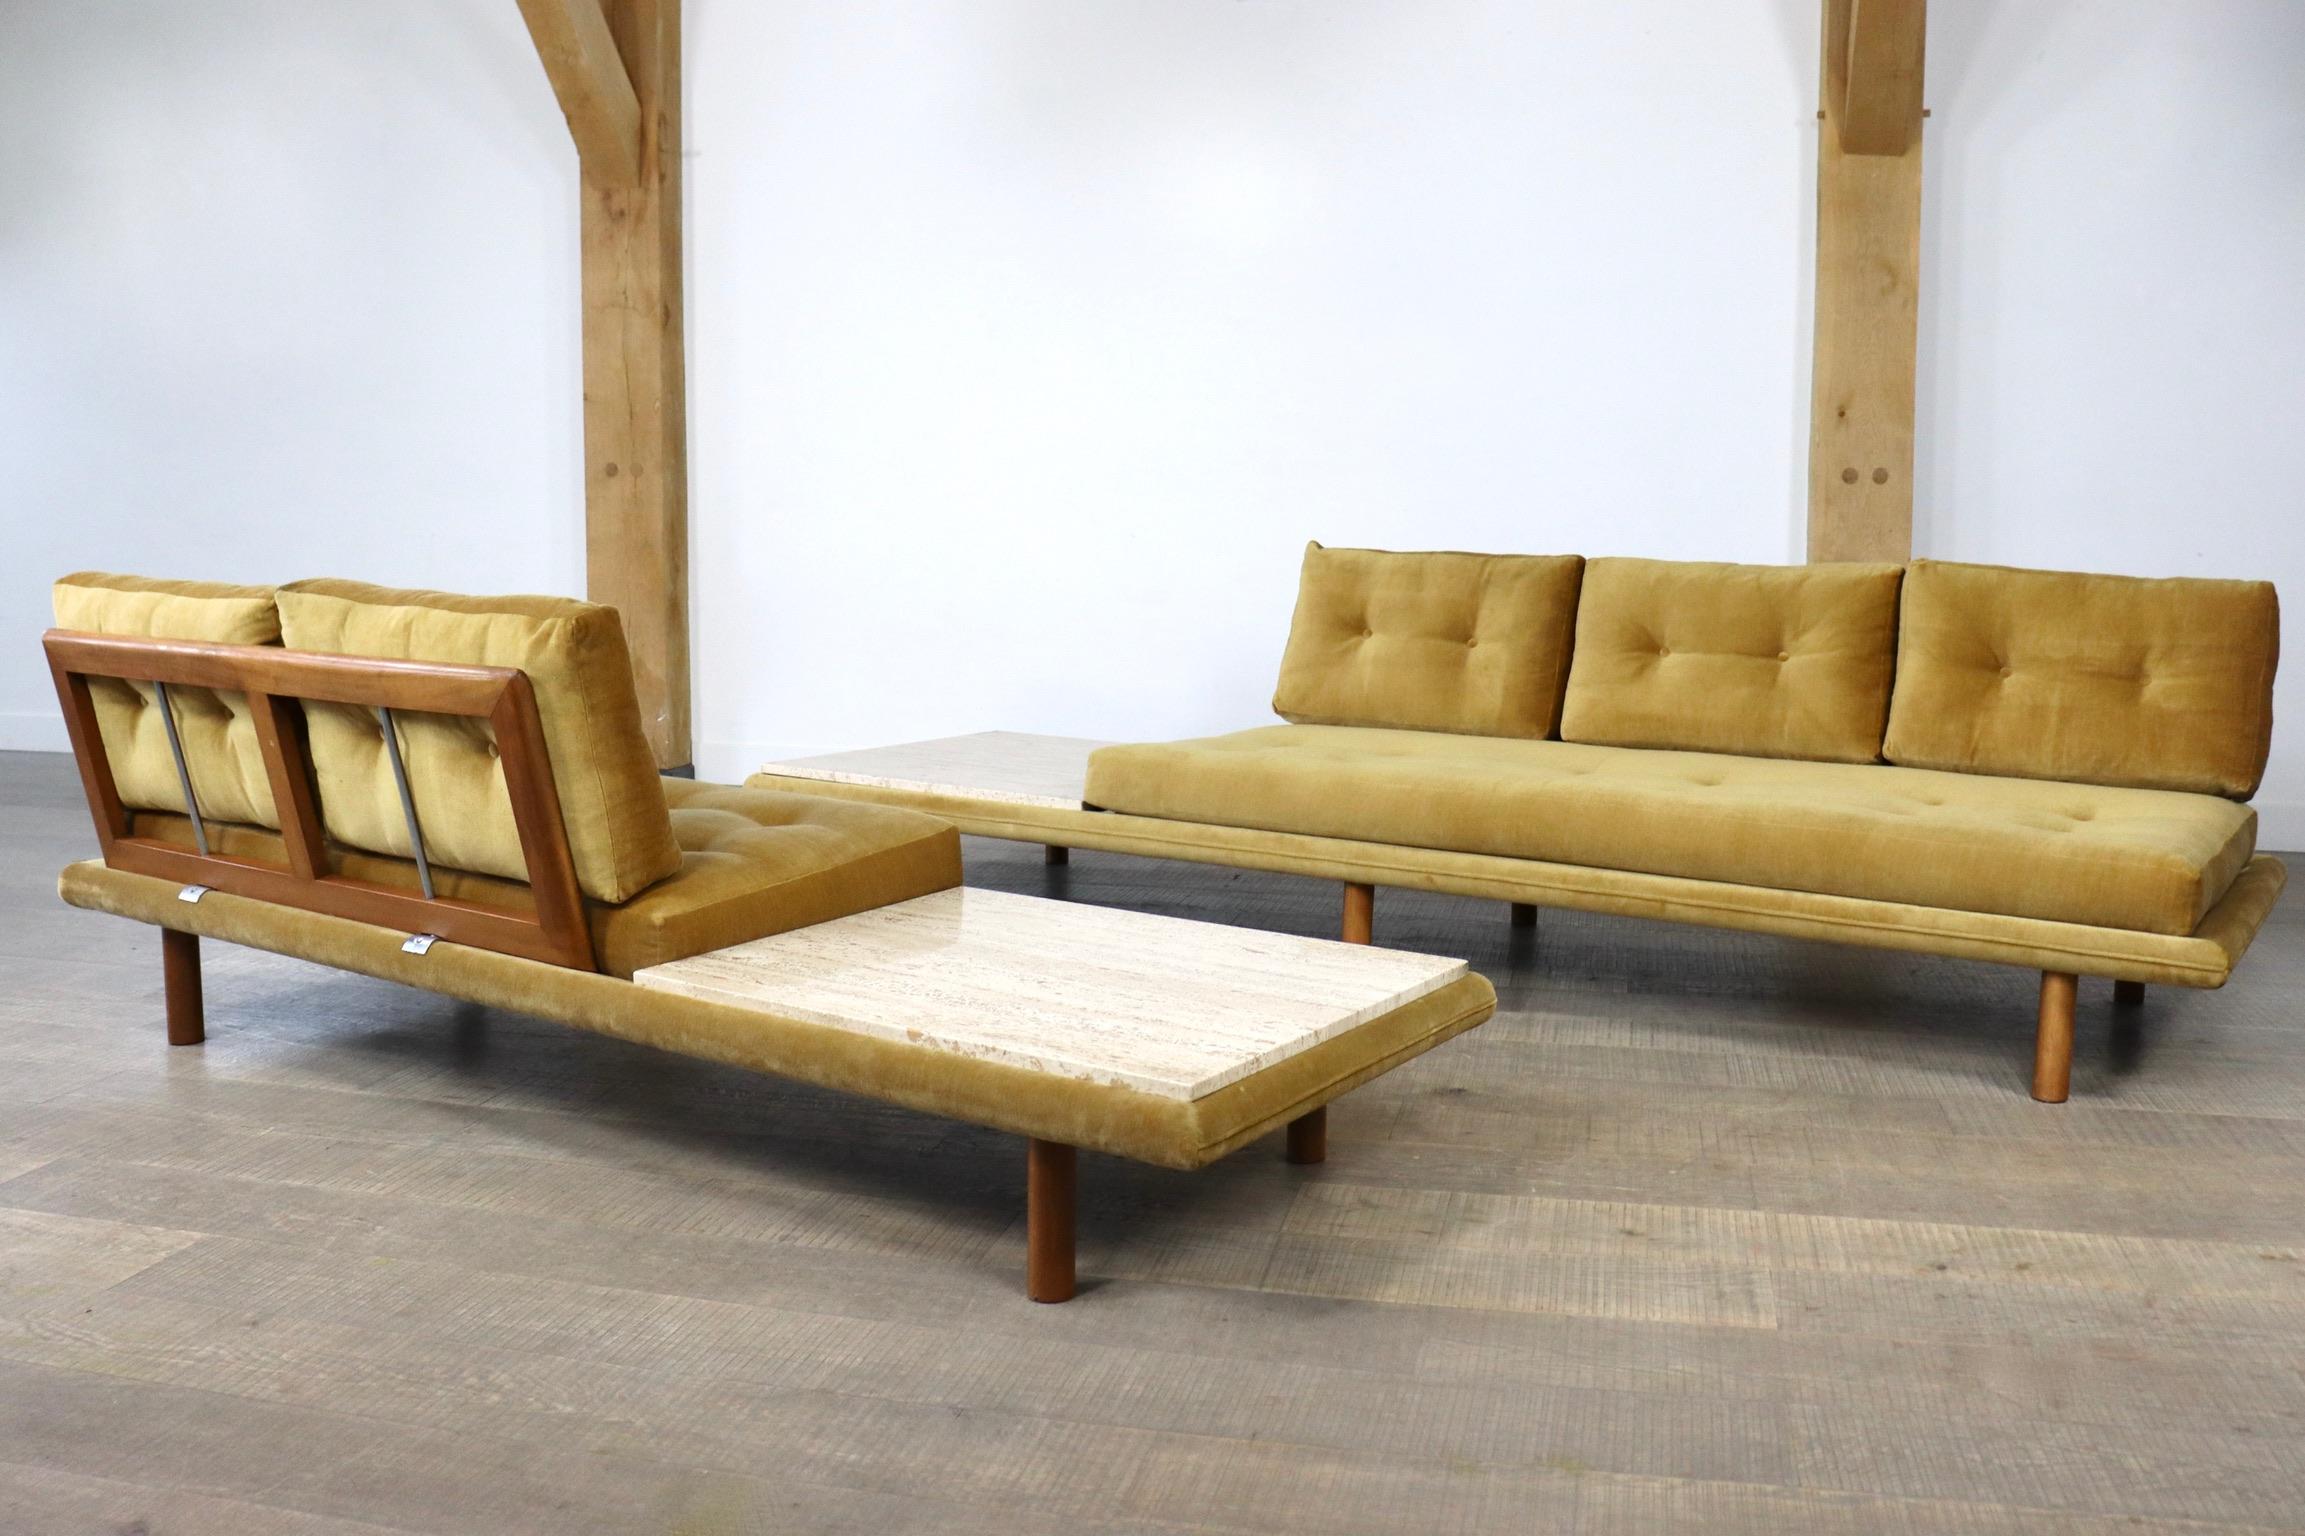 Pair of 1960s designer sofas / daybeds by Franz Köttgen for Kill International, model 6603.

This vintage set consists of a 3-seater sofa and a 2-seater sofa with original velor upholstery in yellow / green mustard color. Both sofas have an